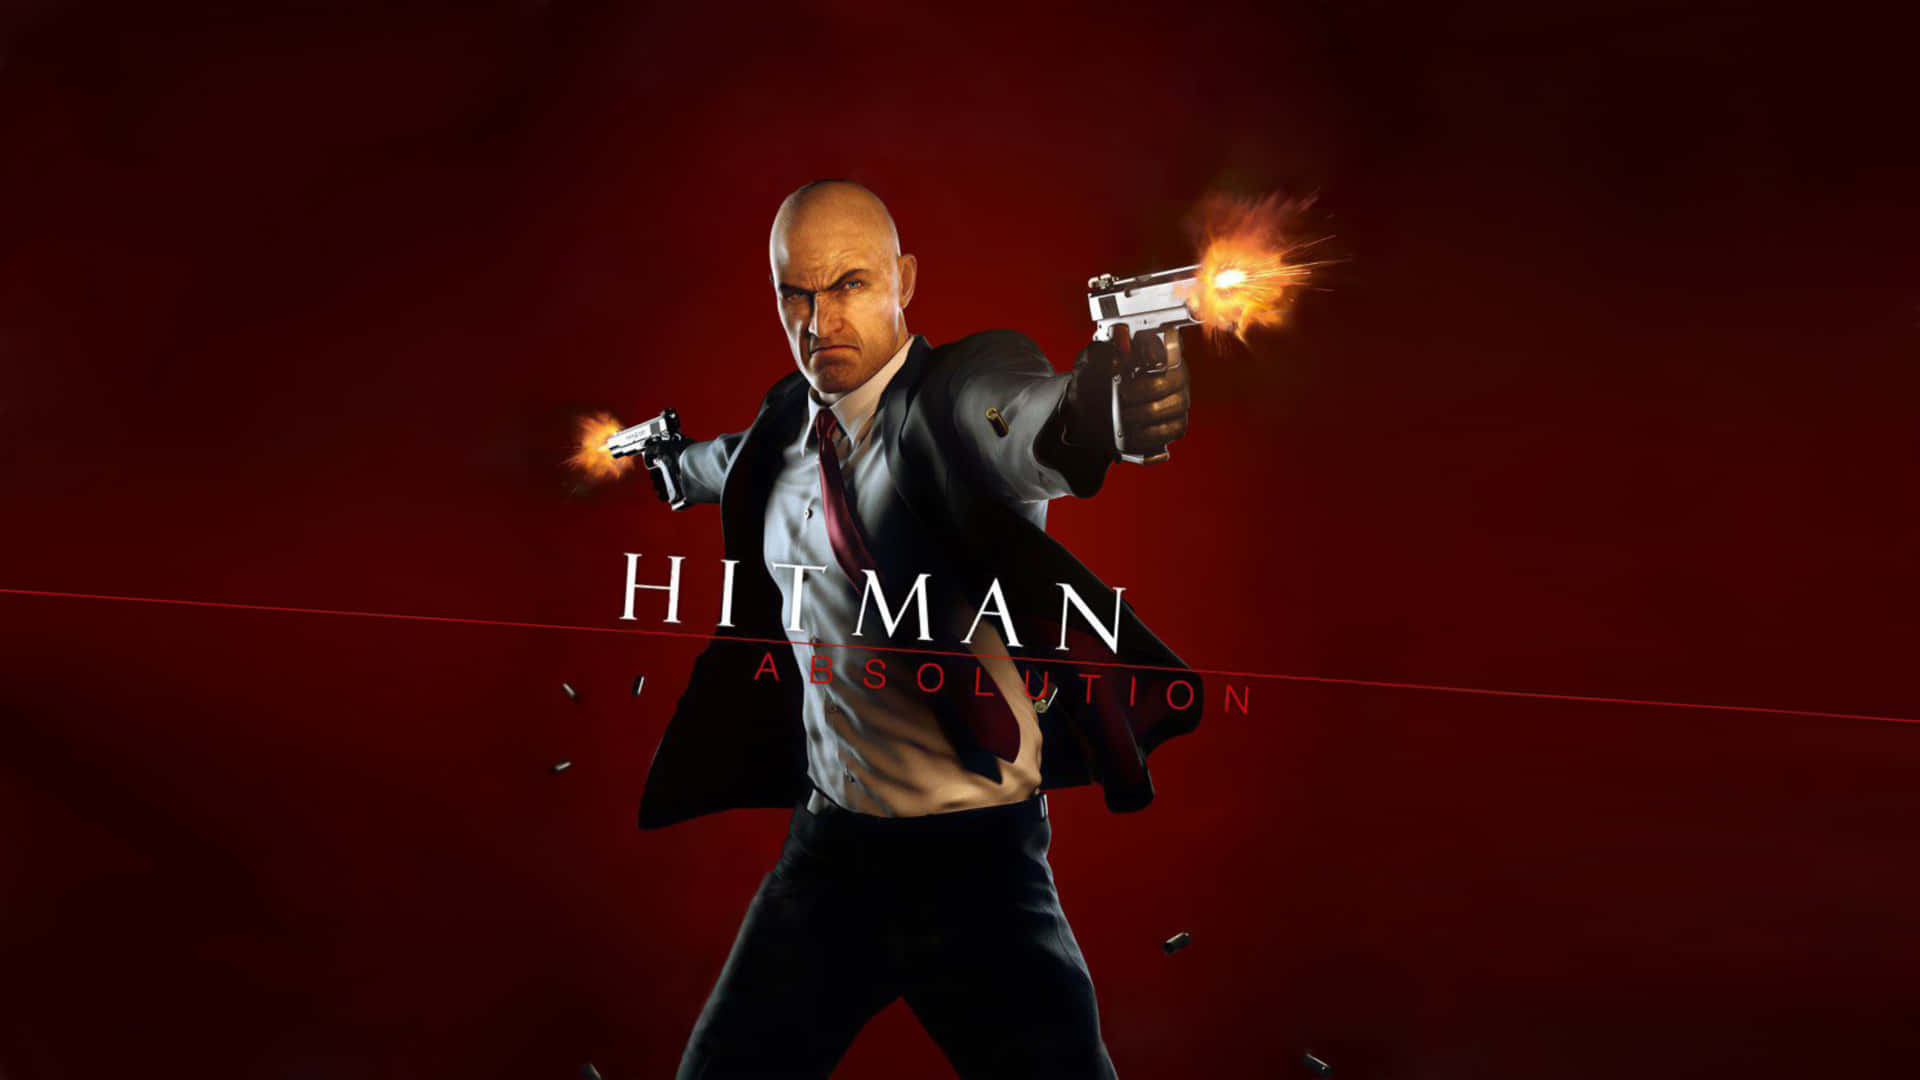 Take on the dangerous mission and enter the world of Hitman Absolution.